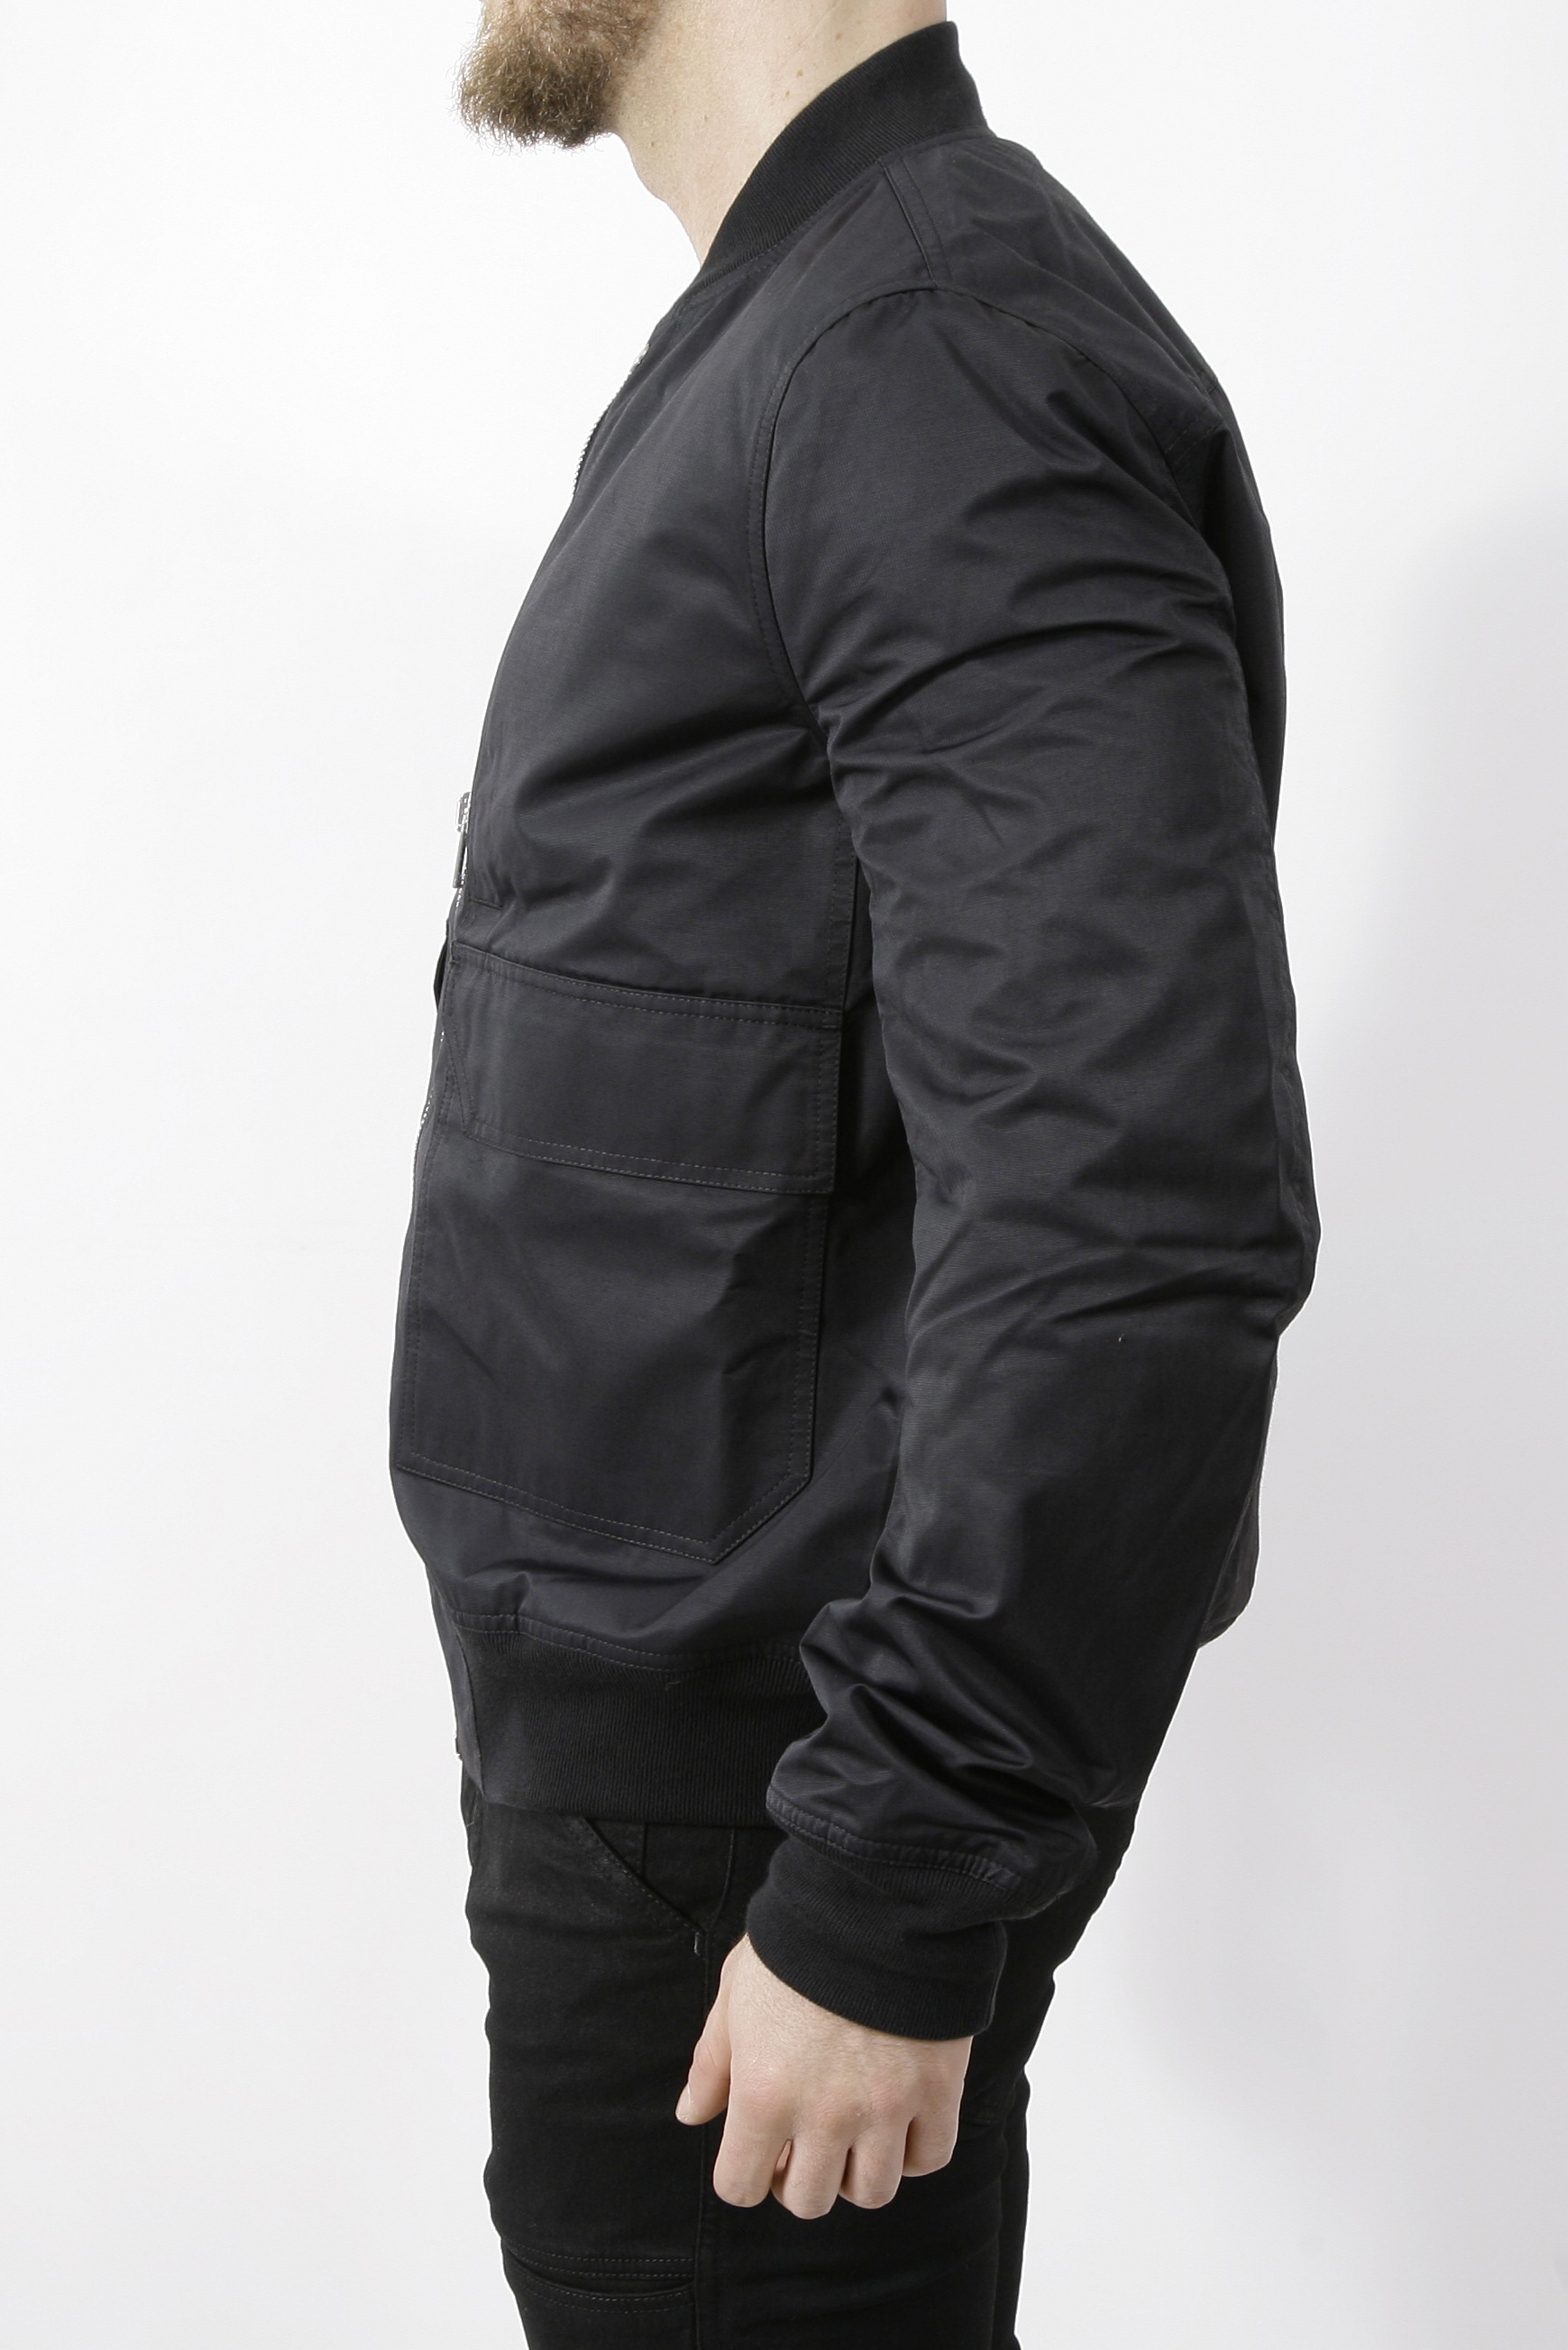 DRKSHDW by Rick Owens Padded Bomber Jacket Lido #rickowens